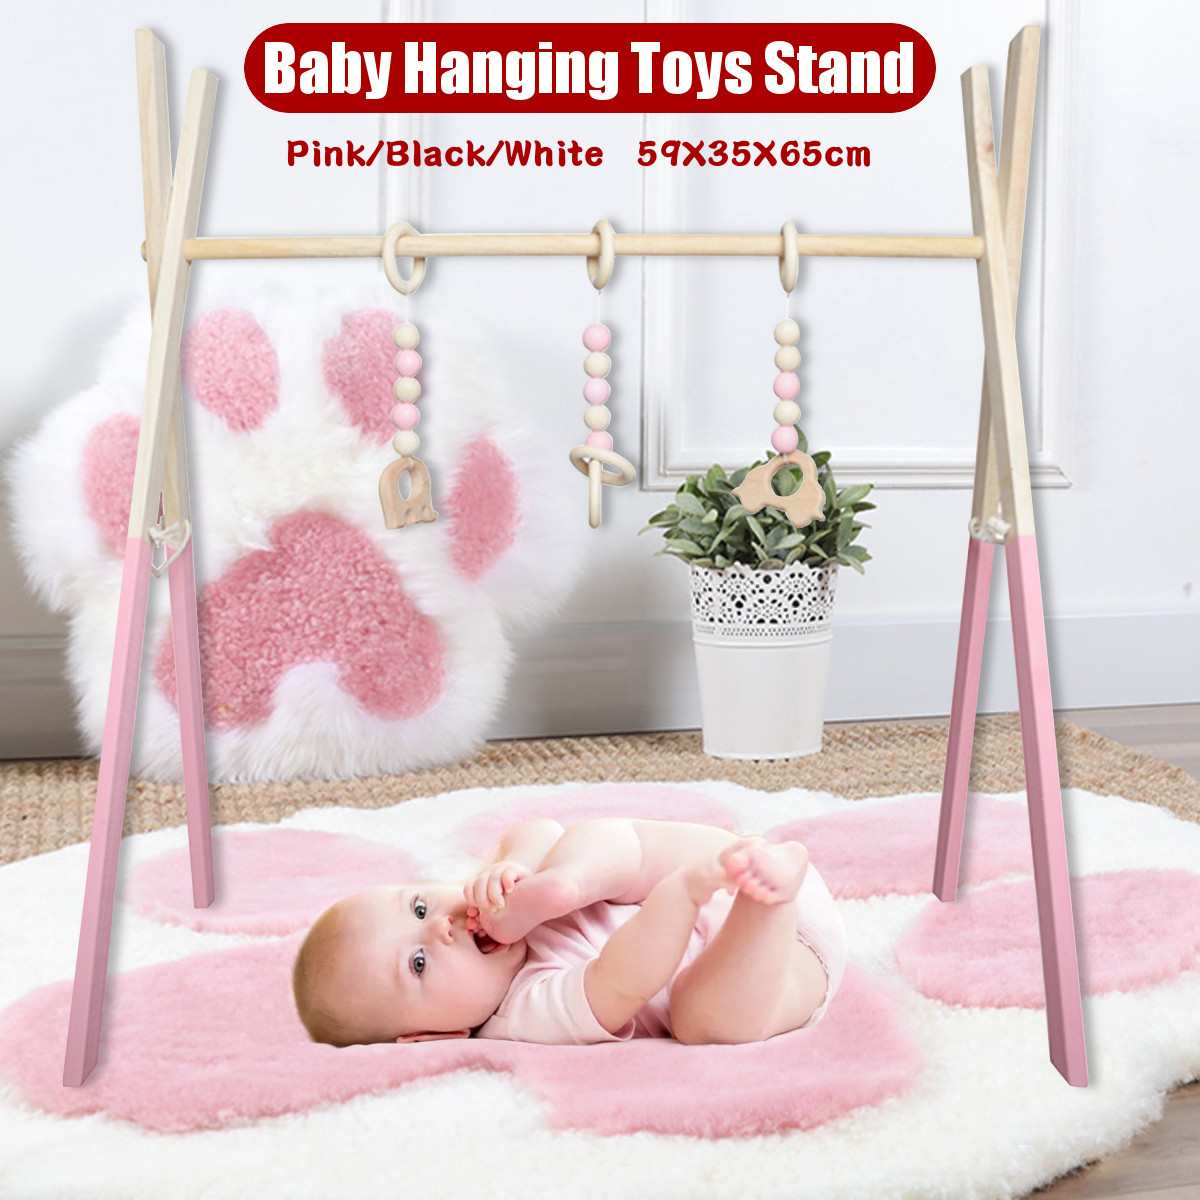 Wood-Baby-Stand-Play-Toy-Nursery-Fun-Hanging-Toys-Mobile-Wood-Rack-Activity-Gym-1653804-1